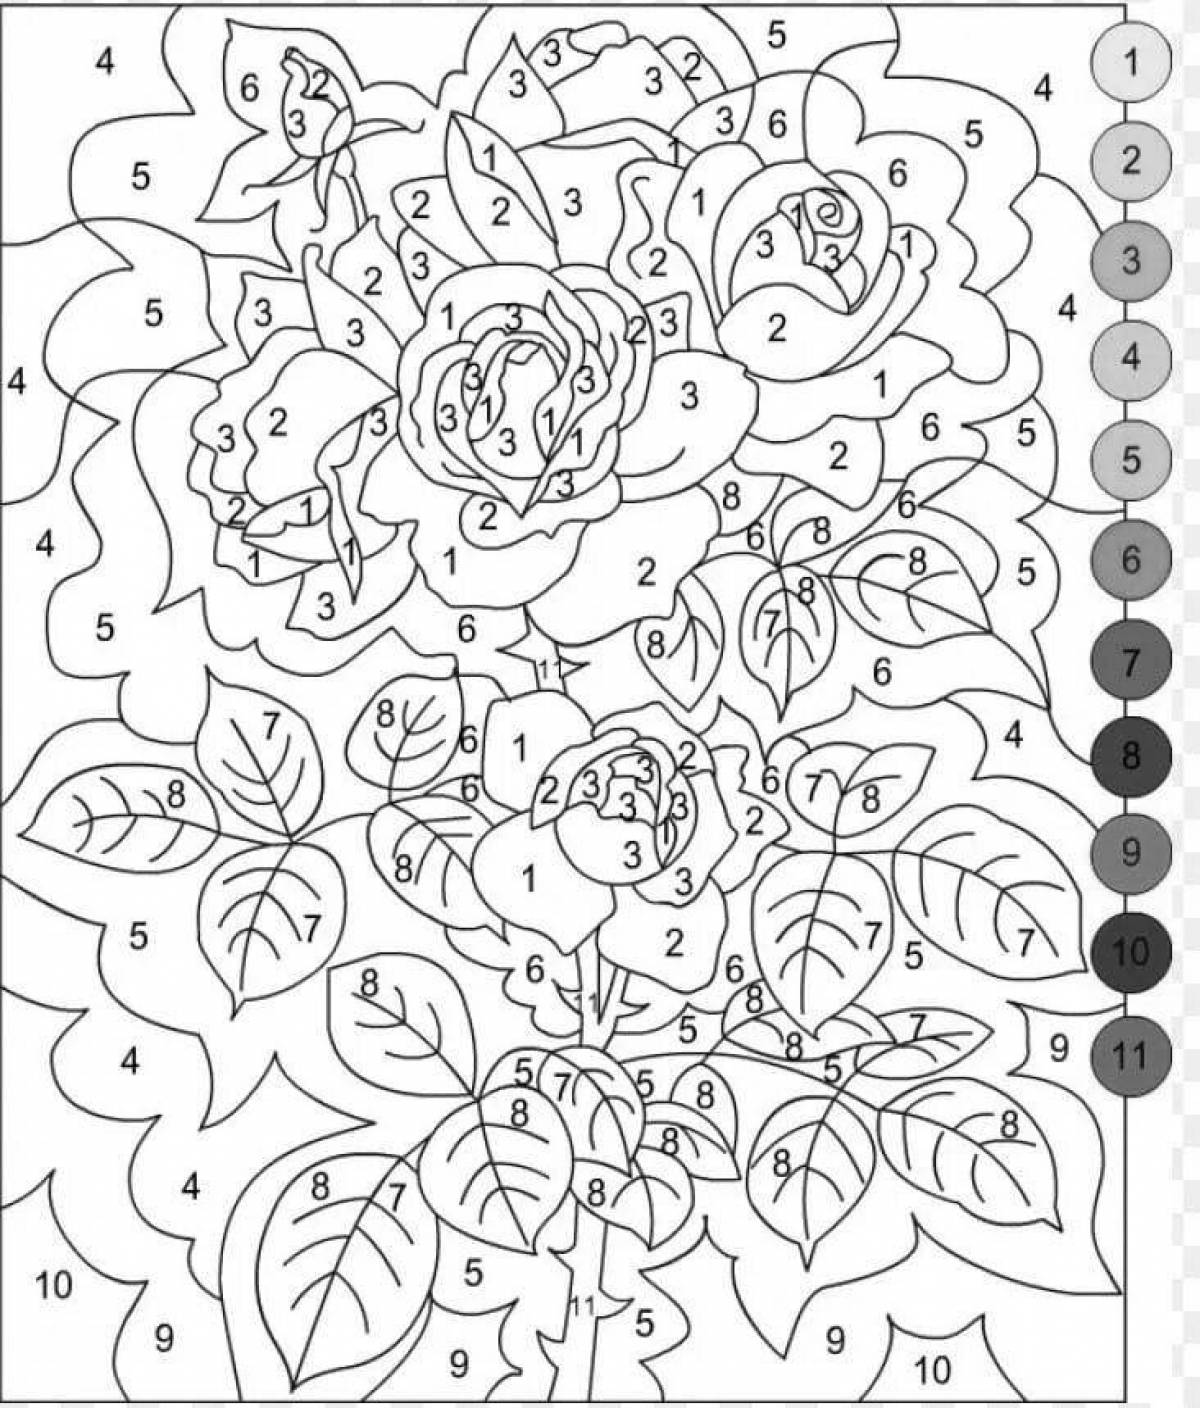 Shining anti-stress coloring by numbers